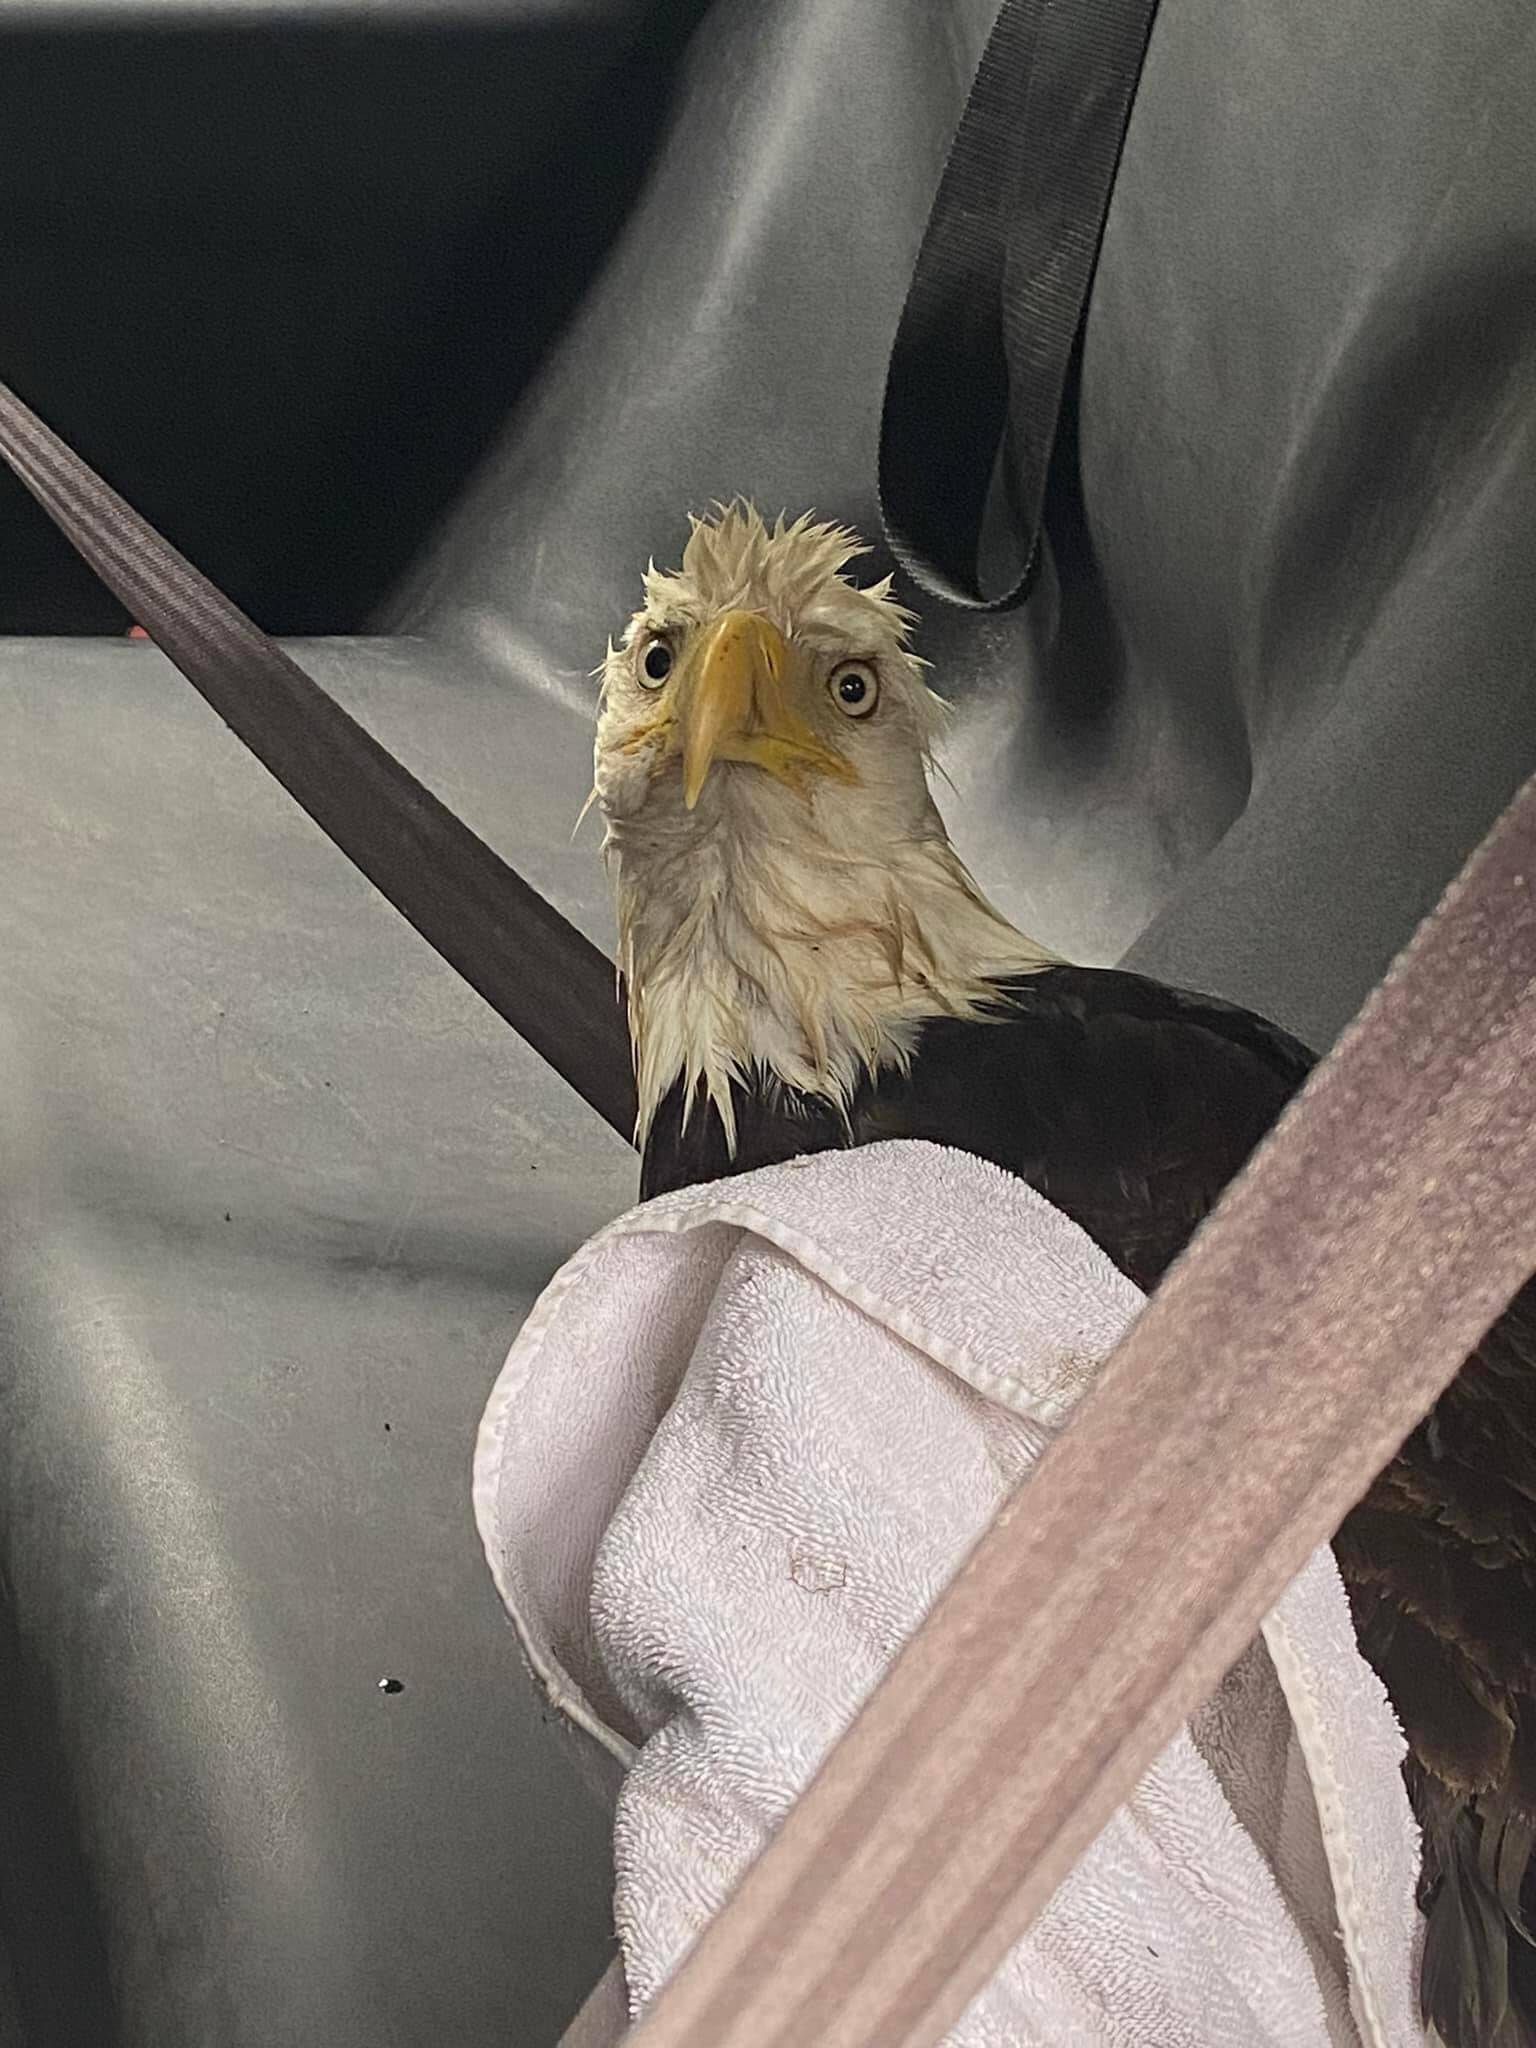 Photo provided
Island County Sheriff’s Office posted this photo of an injured eagle that was brought to an animal clinic on Tuesday with the caption, “That look you get when you’ve had a rough night on the town and wake up in the back of a cop car. Lt. Crownover located this wayward soul on South Whidbey and transported it to the Useless Bay Animal Clinic for treatment of an injured wing (and possibly a hangover).”